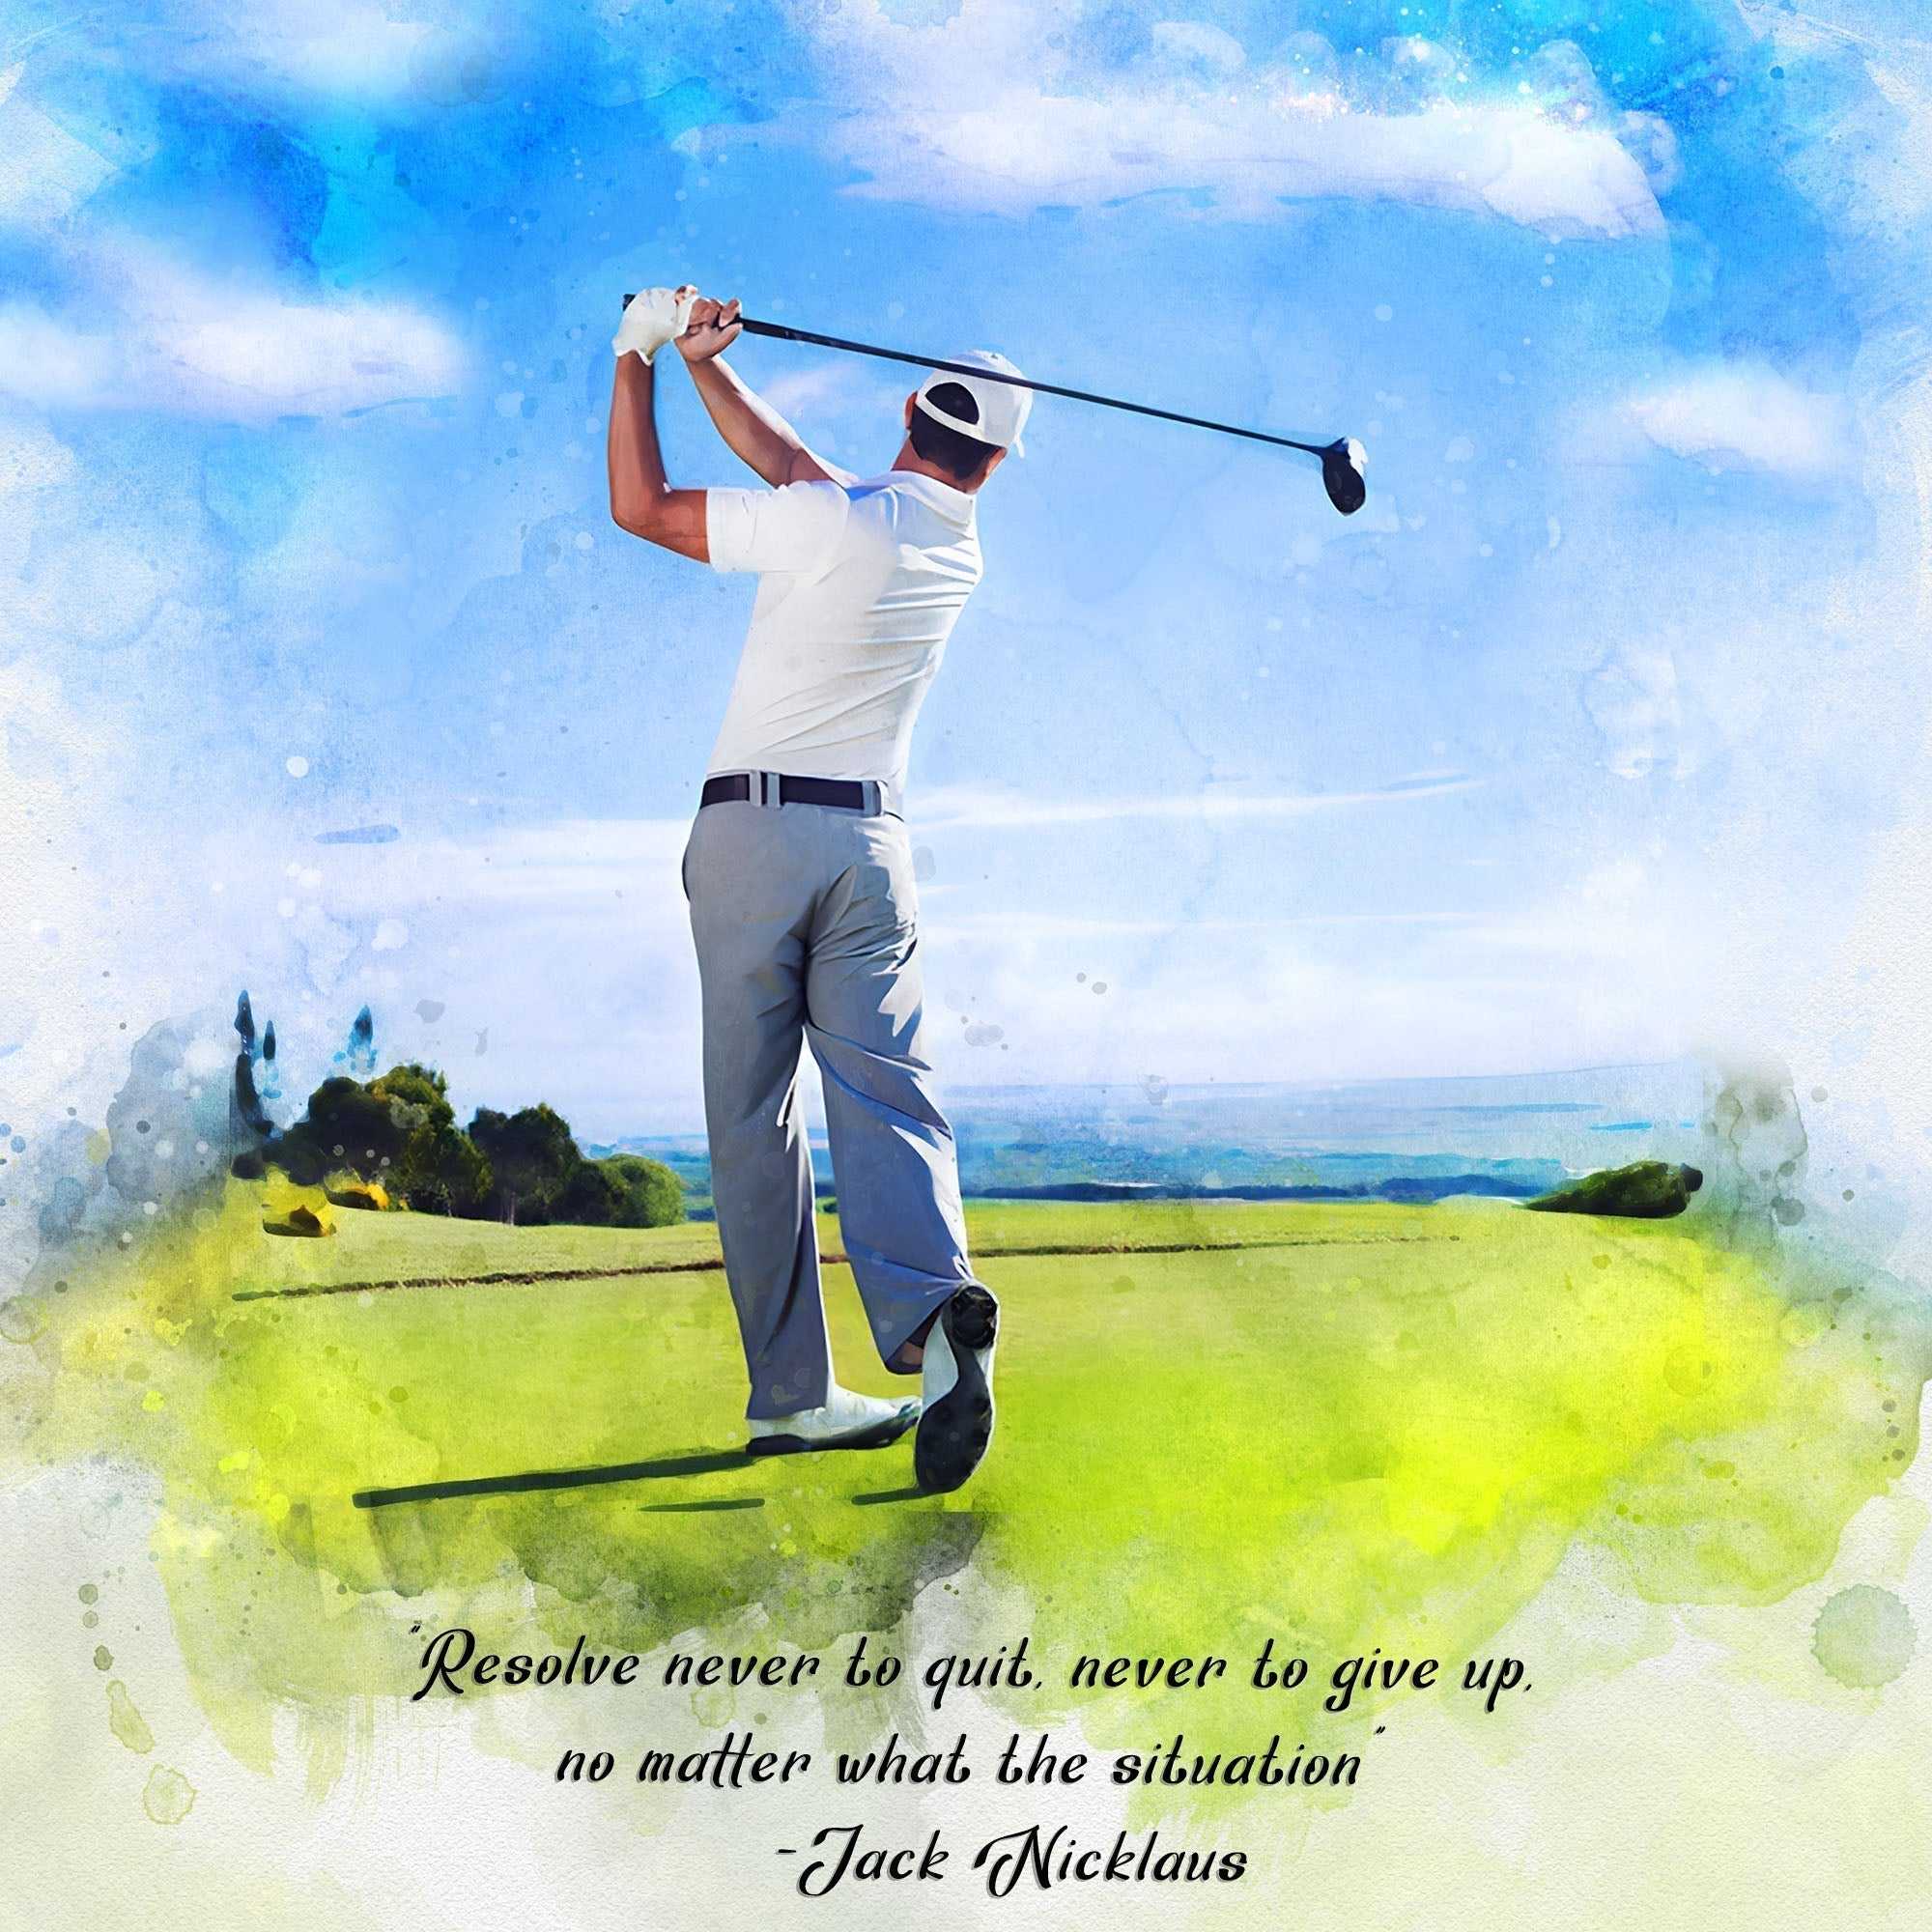 Gifts for Golf Players and Golf Enthusiasts - FromPicToArt